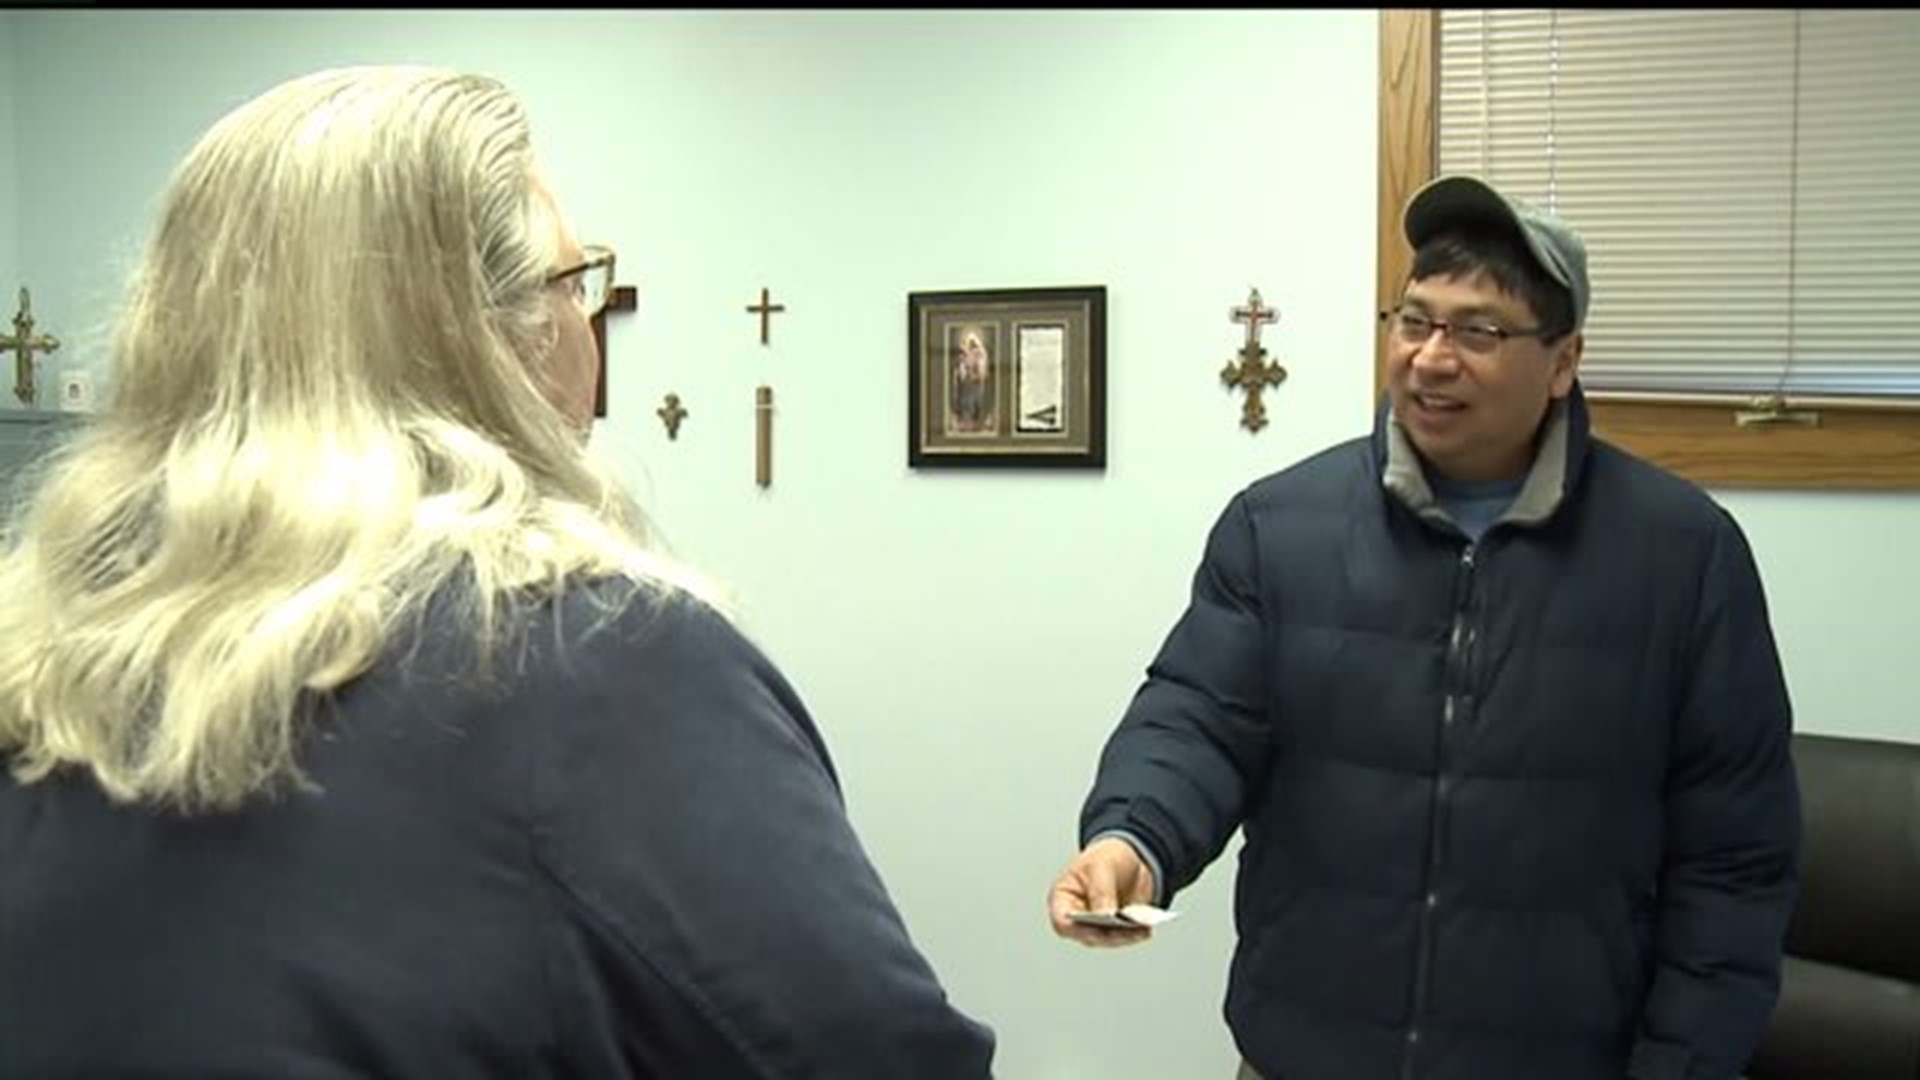 Paying It Forward to the Cristo Rey Pastor